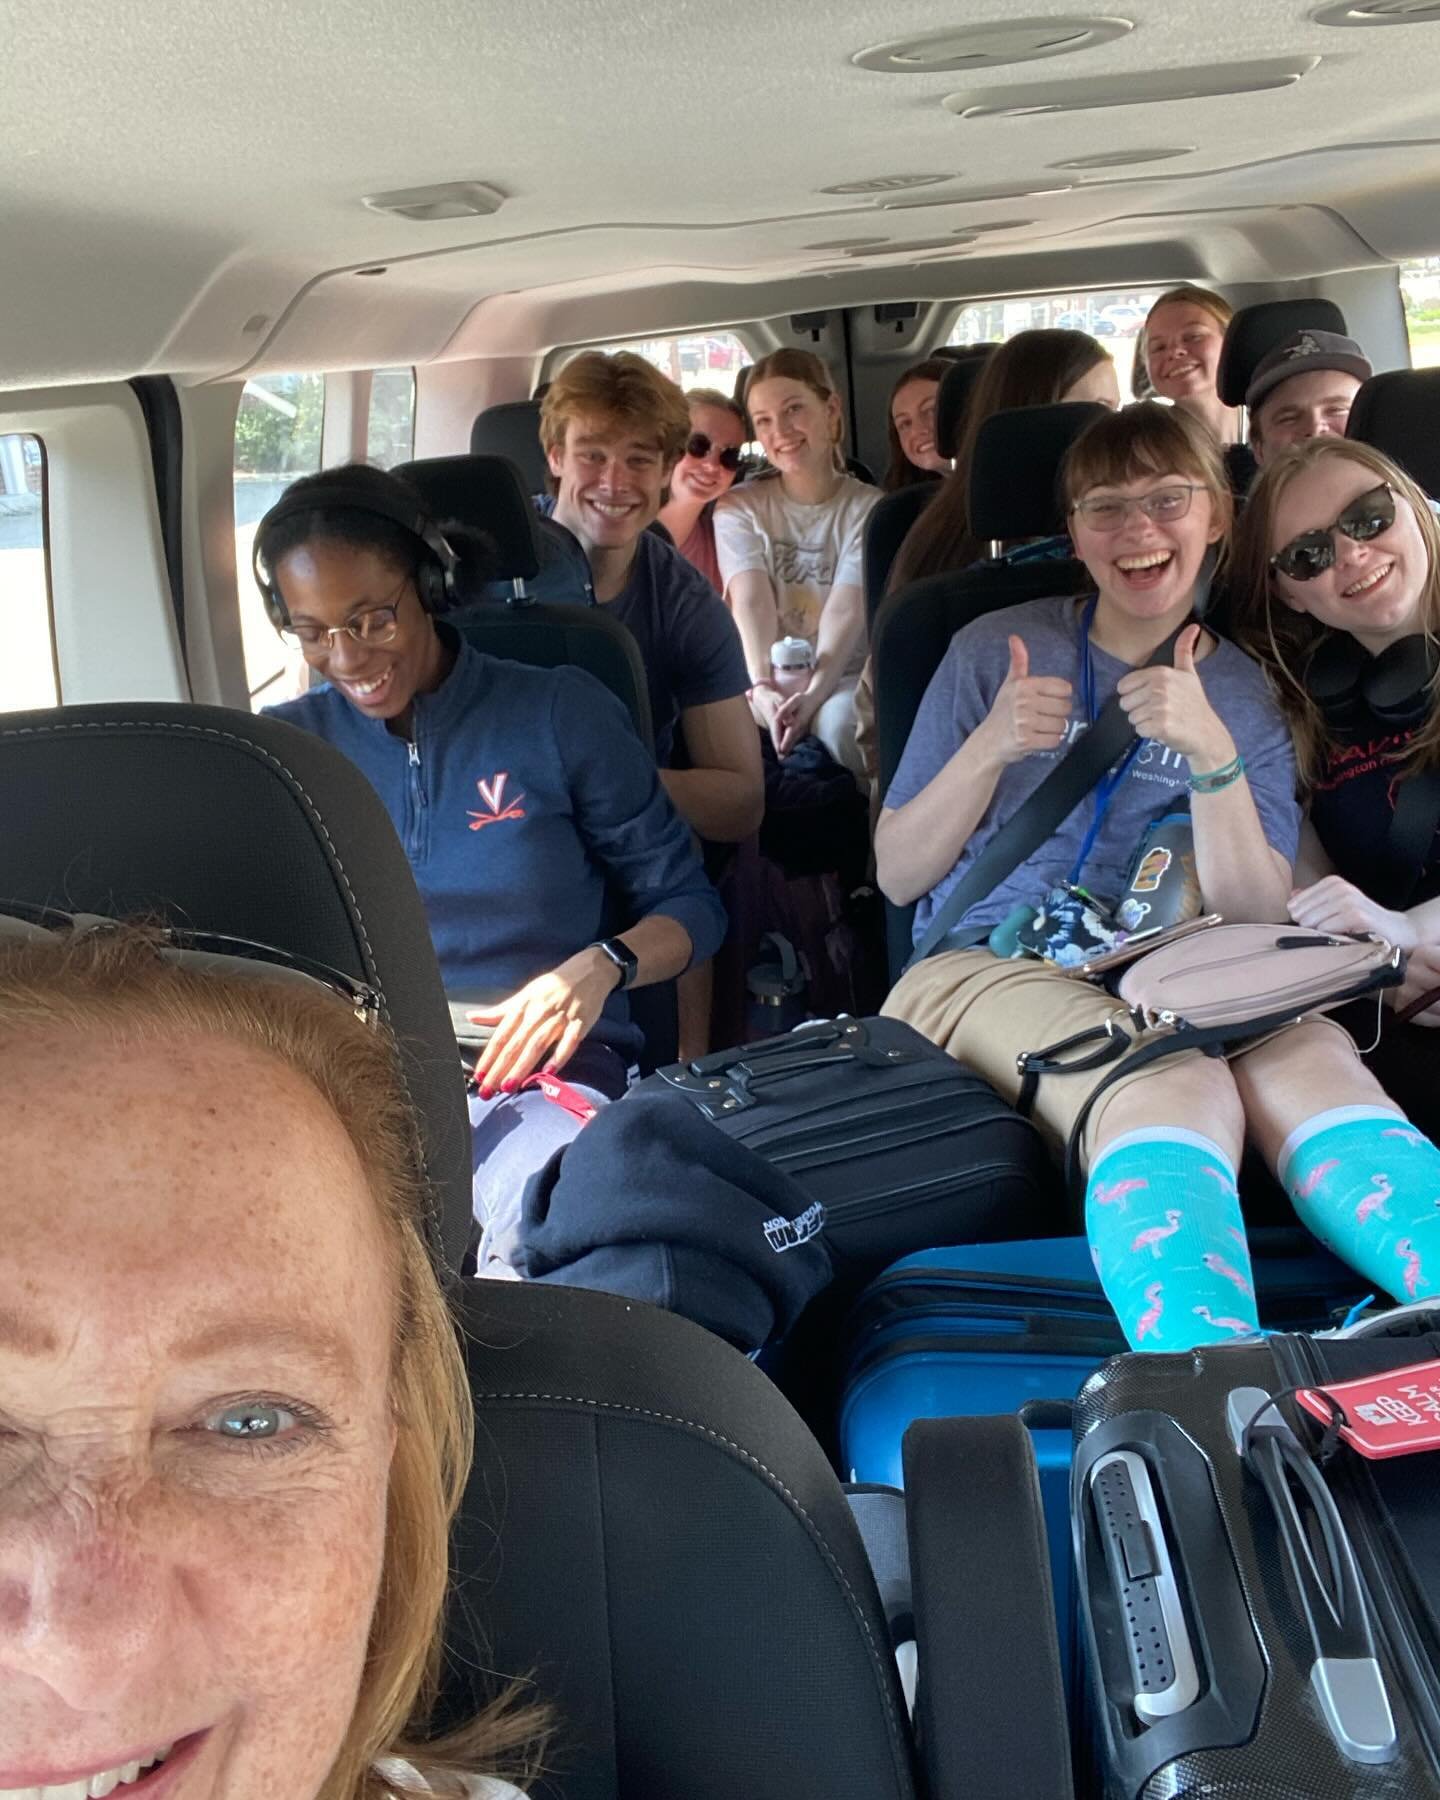 B-bye Chestertown.  Off we go to NOLA.  The American Marketing Association Team is in the road! #ama #marketingisawesome #washingtoncollege #washcollcareer